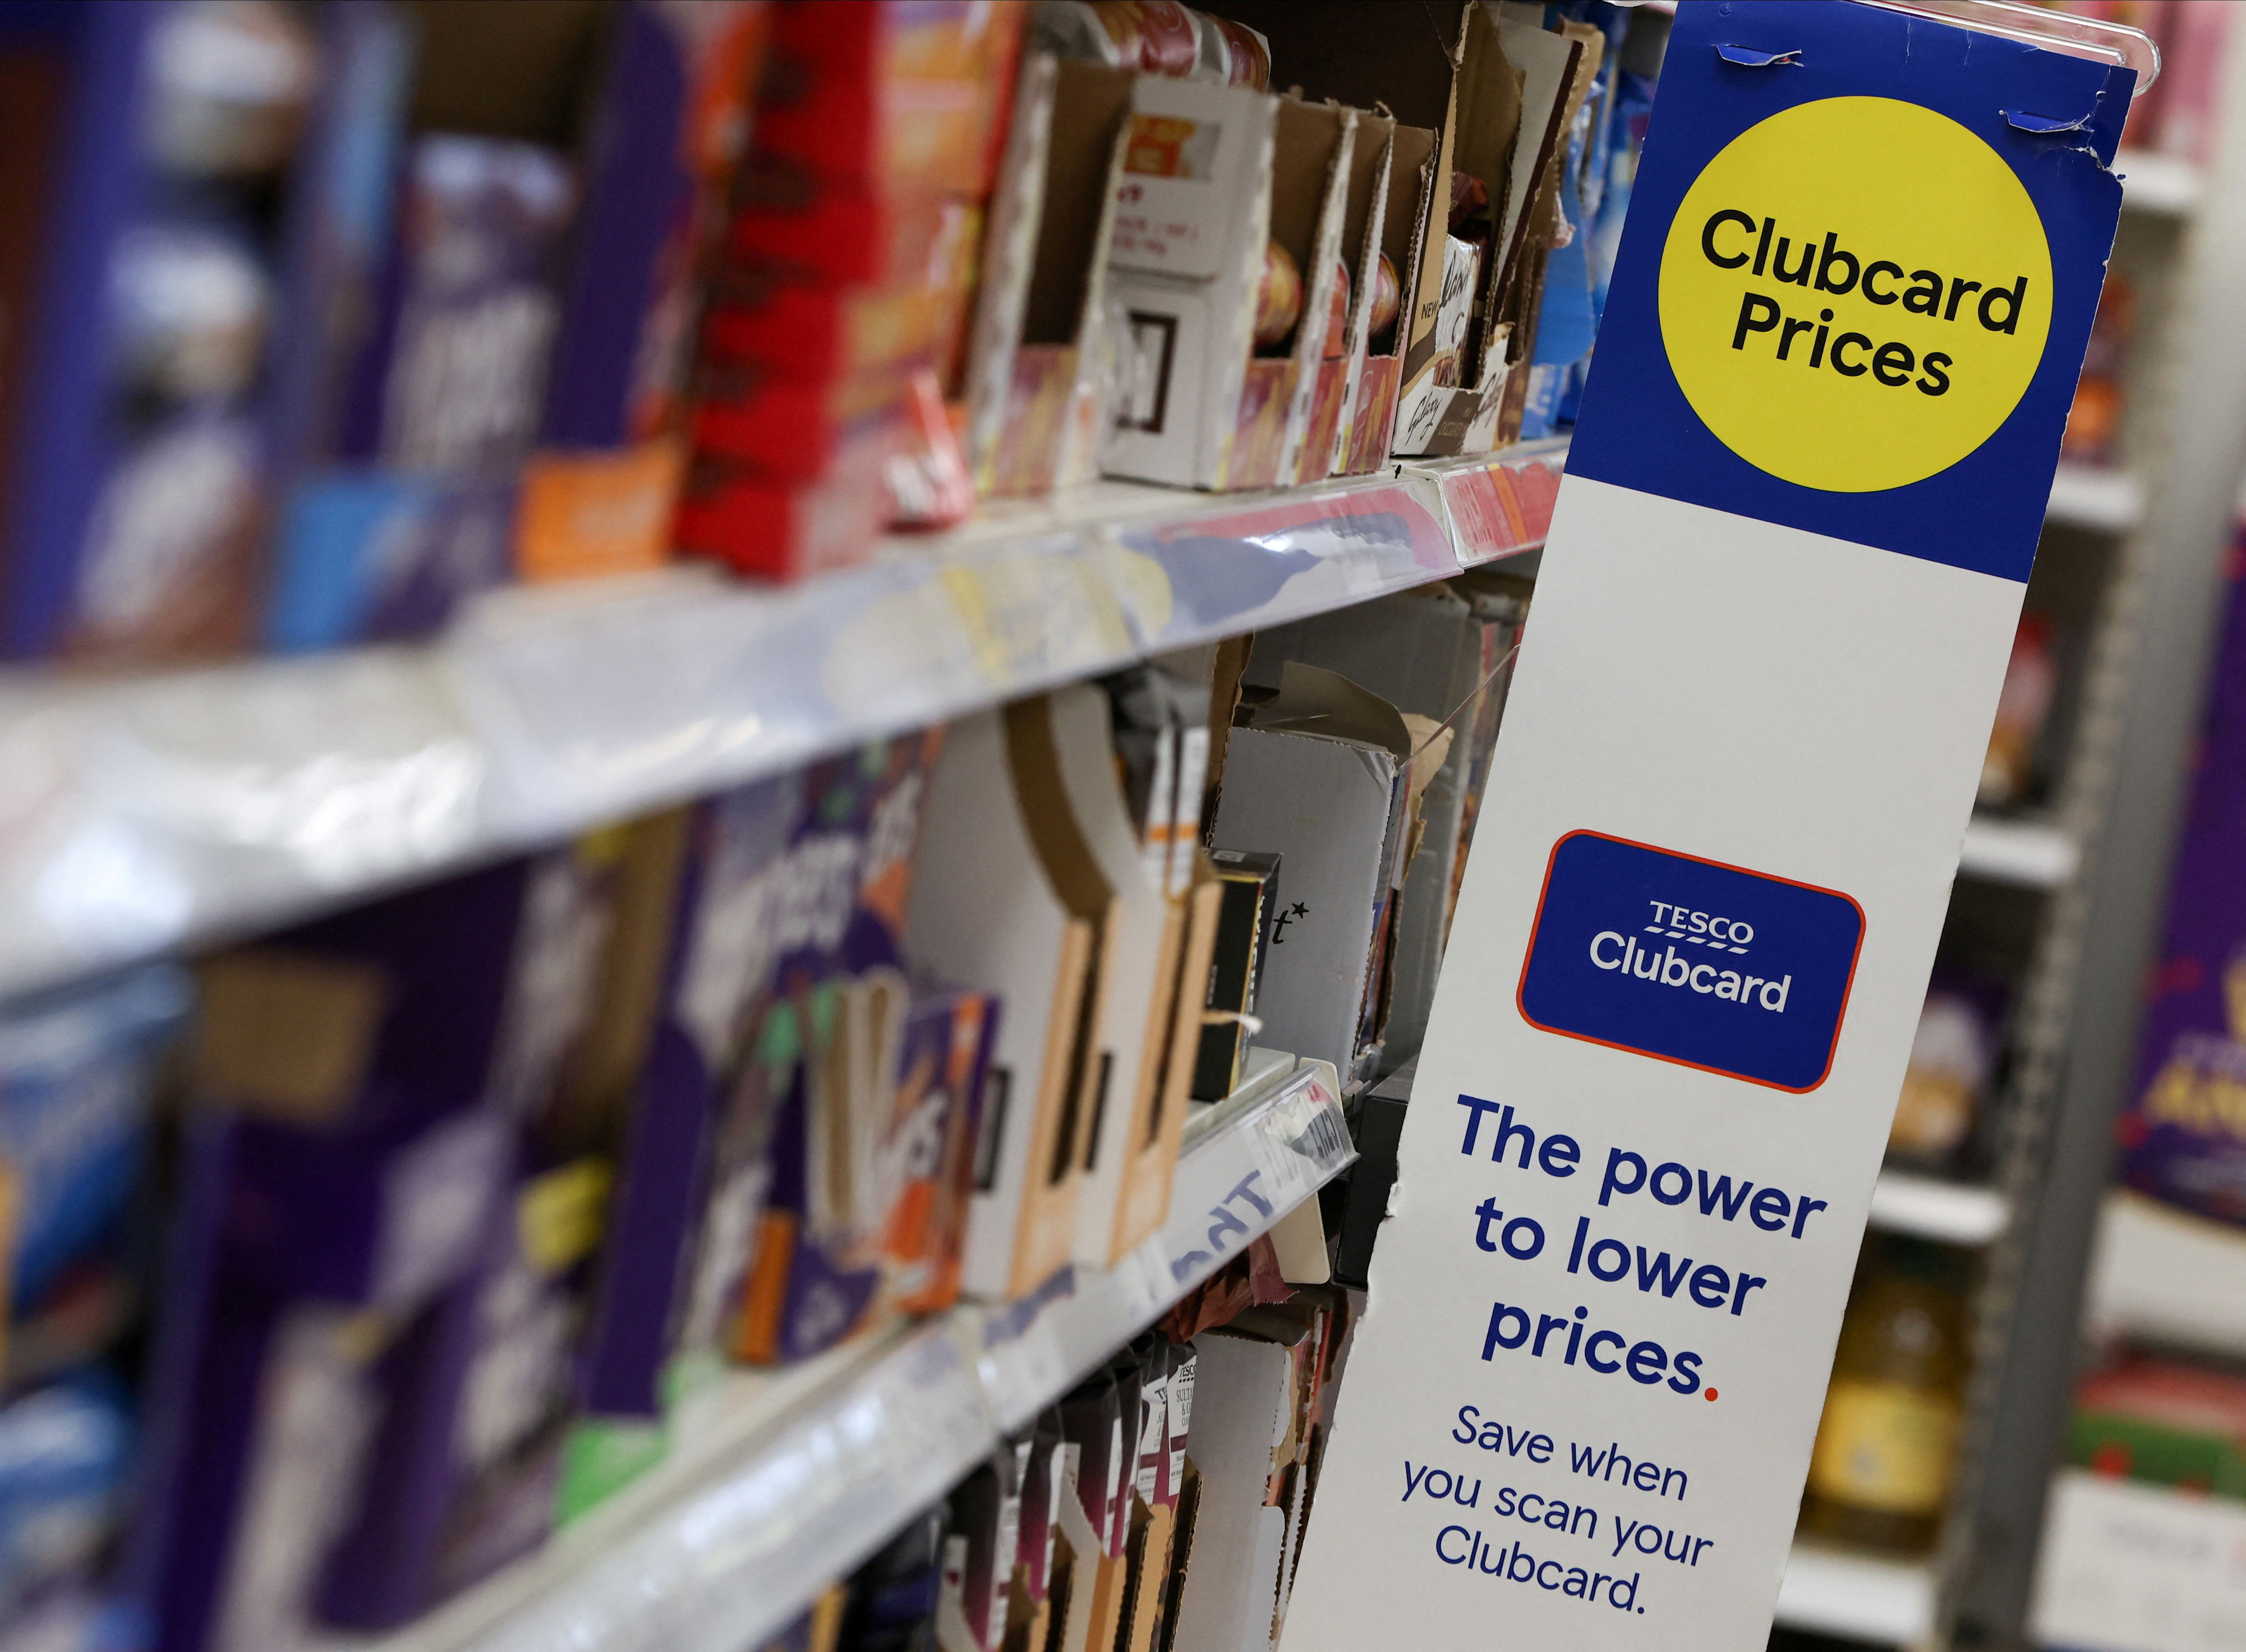 join our tesco club(card): how the cult of the supermarket loyalty card robbed us of normal prices